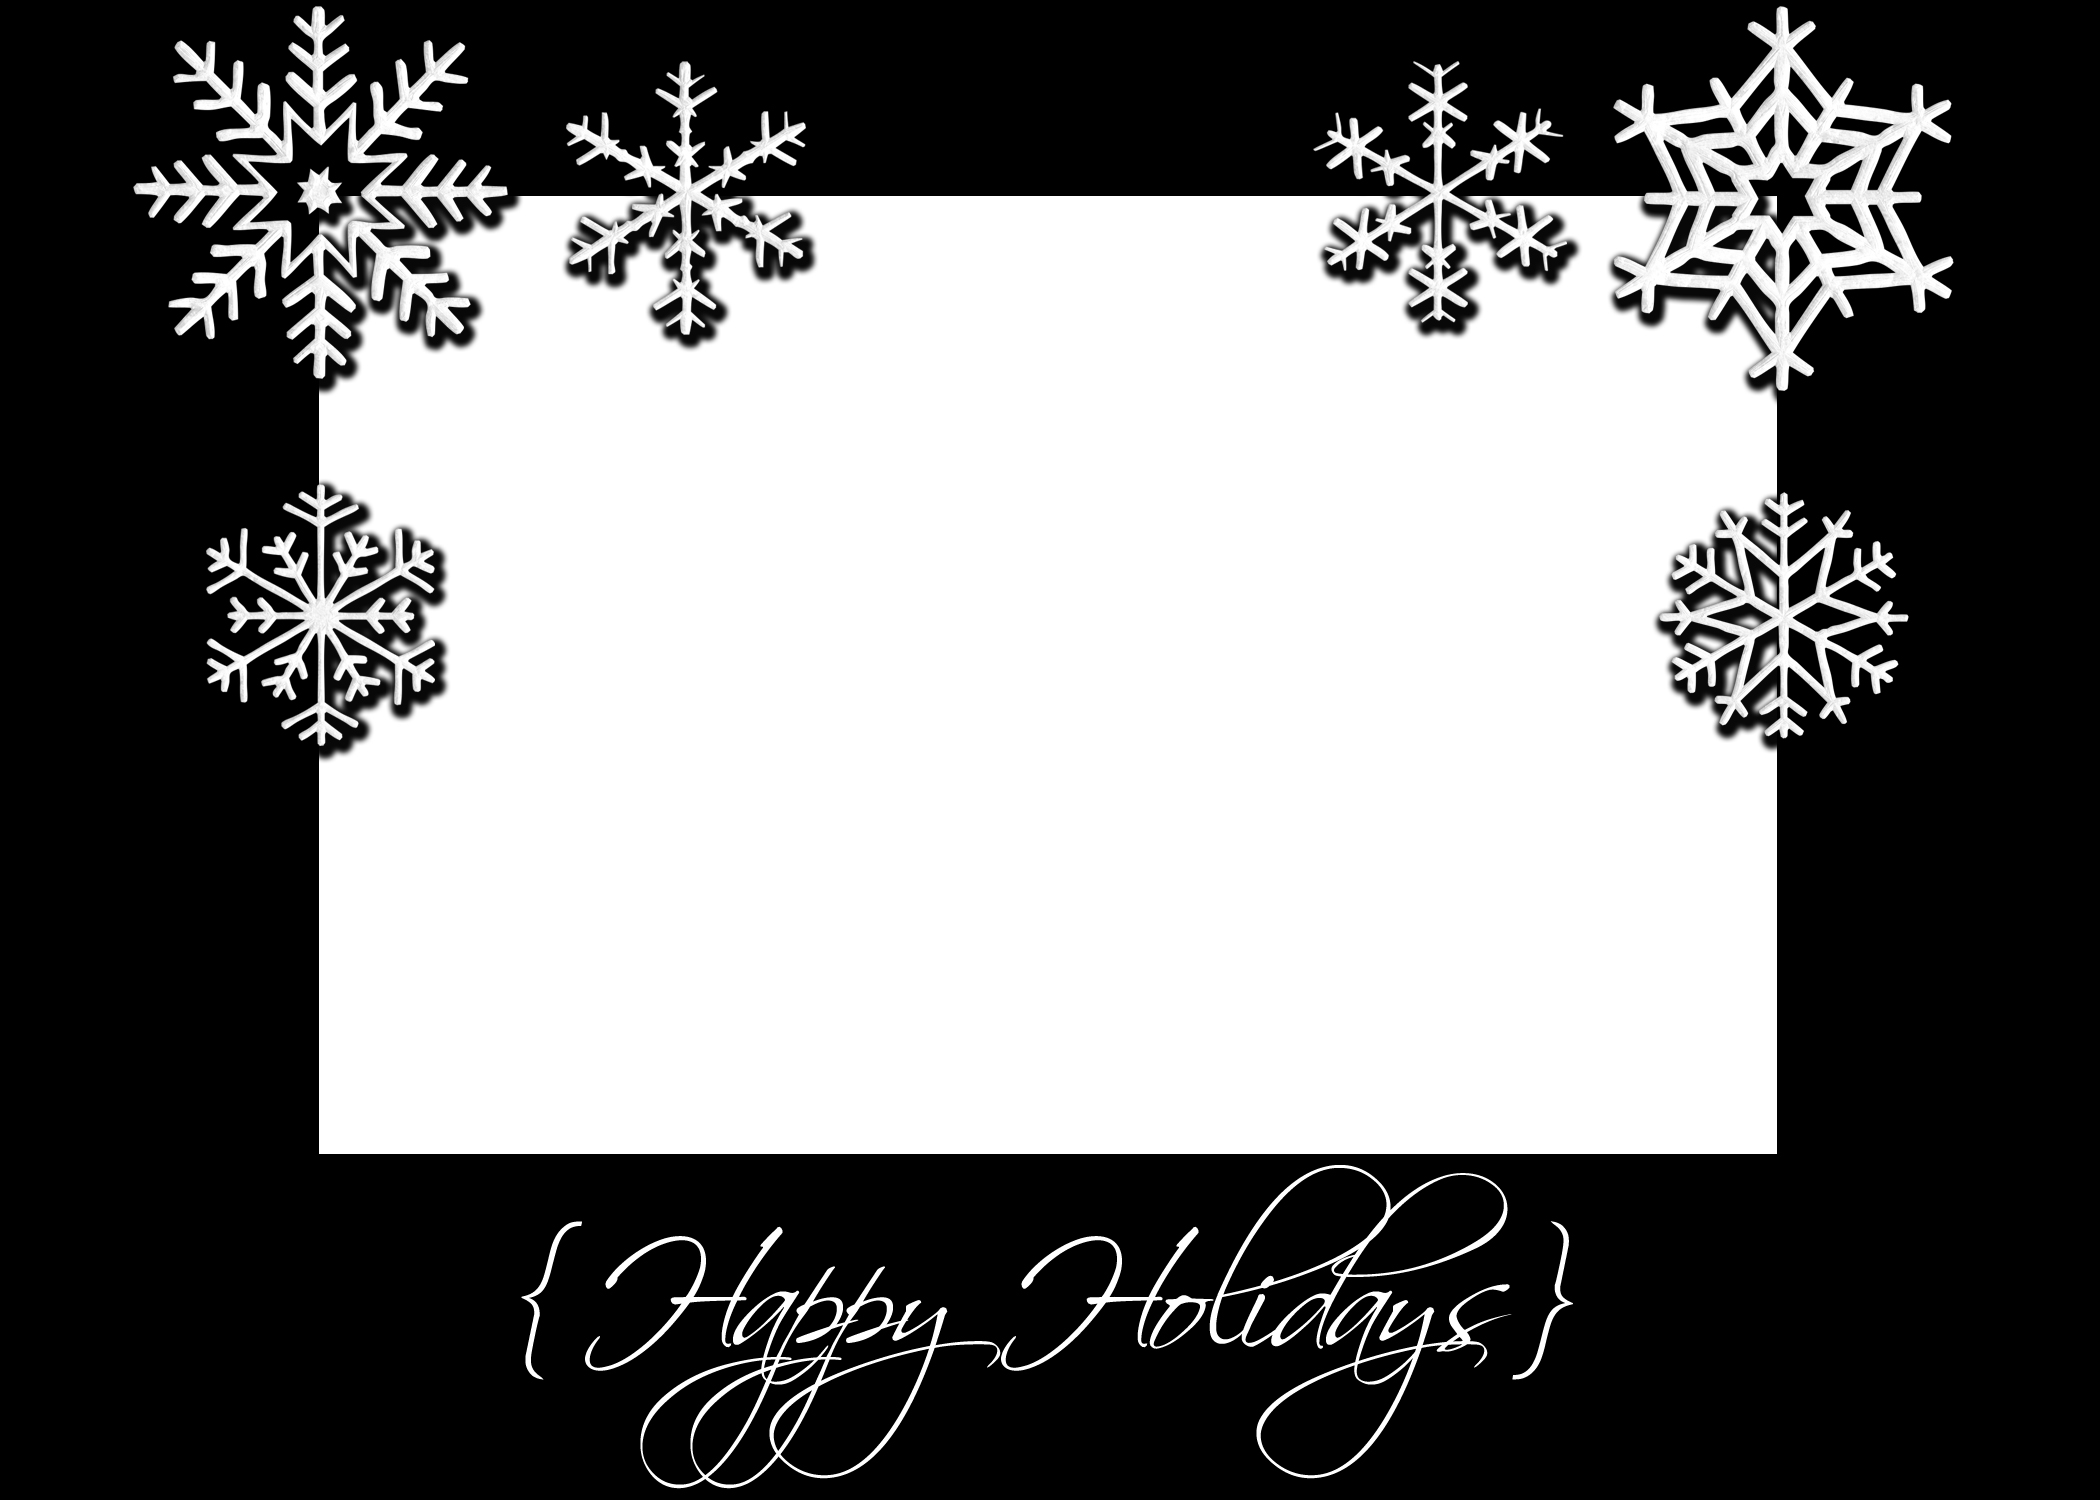 11-best-images-of-black-and-white-printable-holiday-cards-black-and